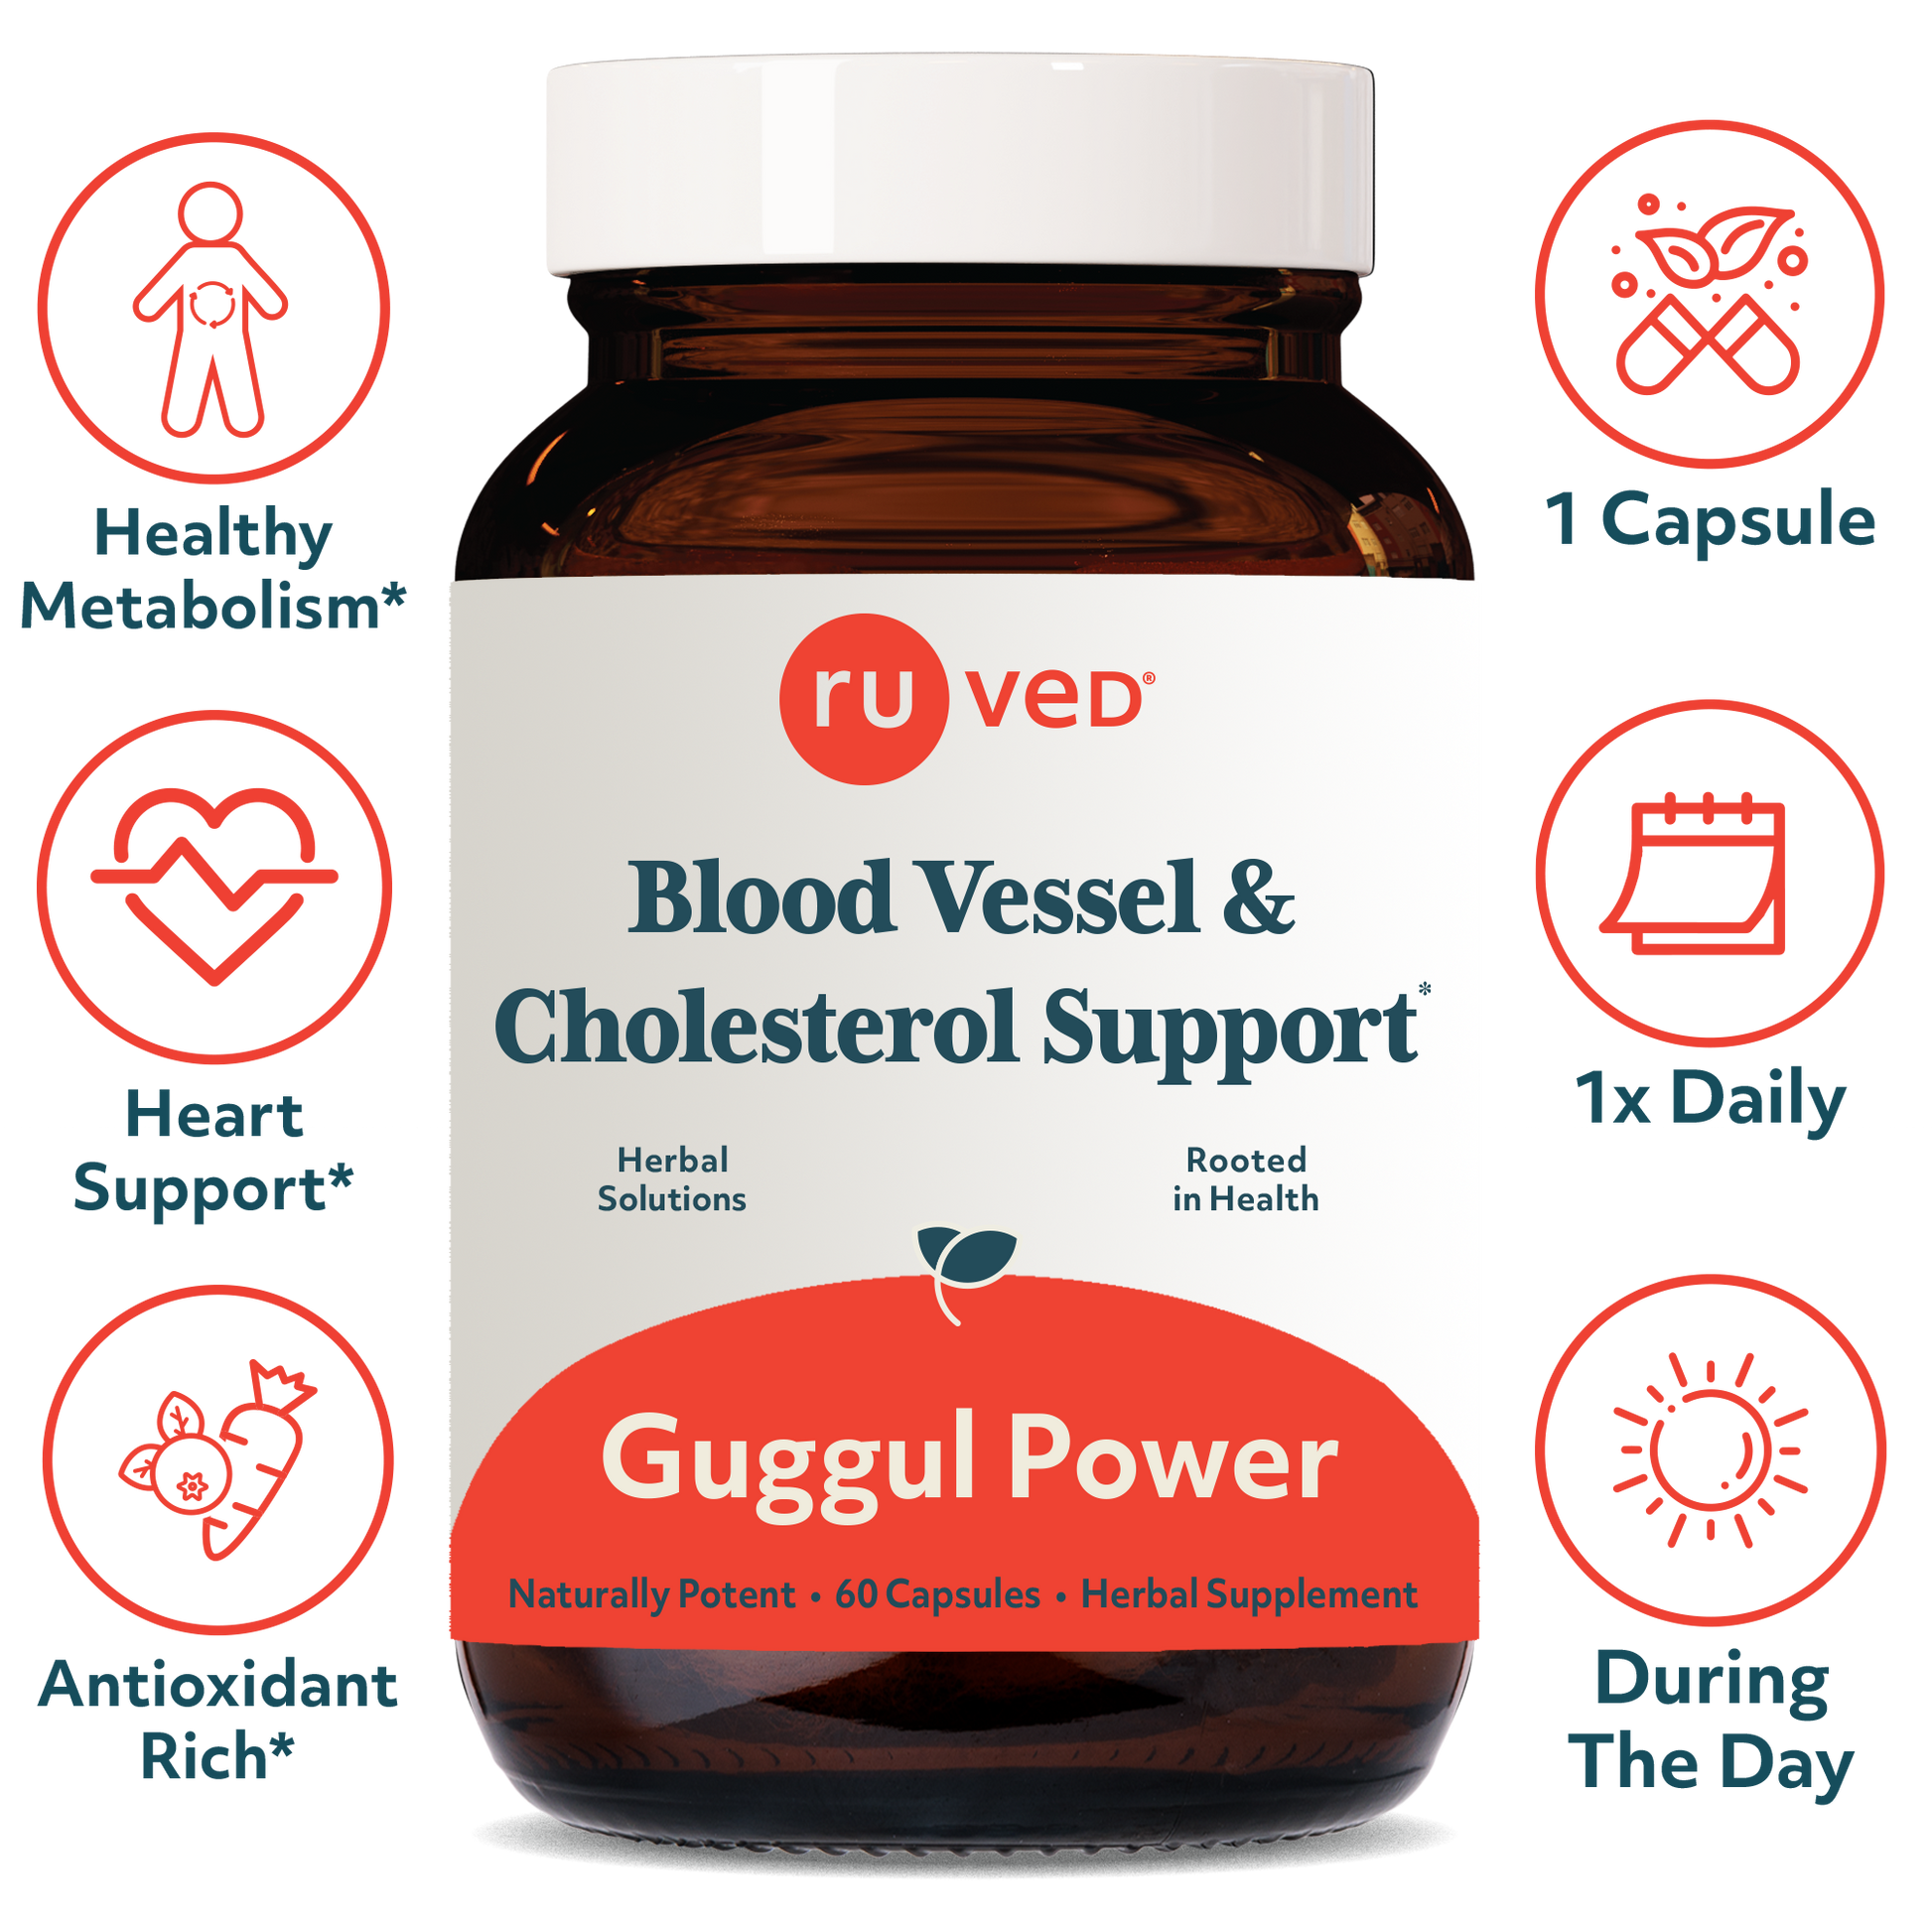 Guggul Power Capsules Infographics - Ayurvedic Cholesterol Support, 60 Vegetarian Capsules, Herbal Blend for Blood Vessel Health and Heart Support